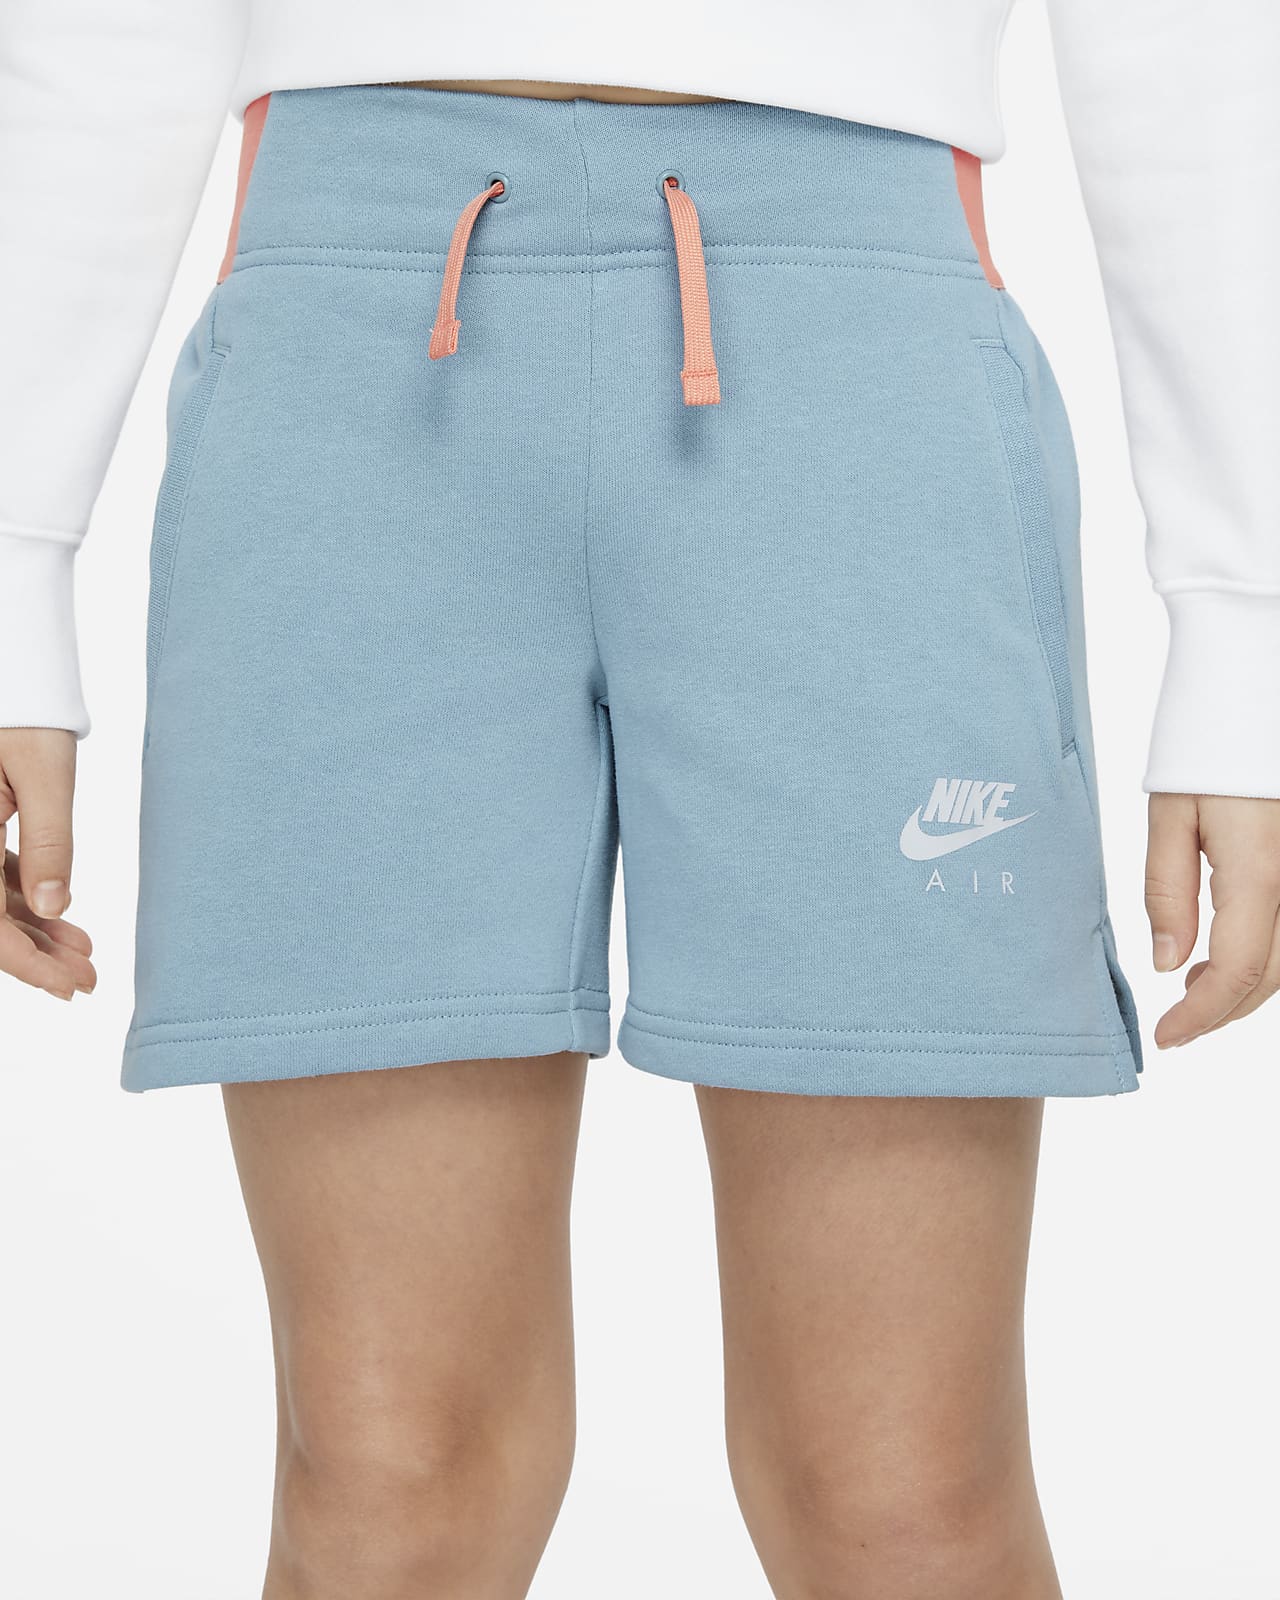 Champion Girls Woven and French Terry Basketball Shorts